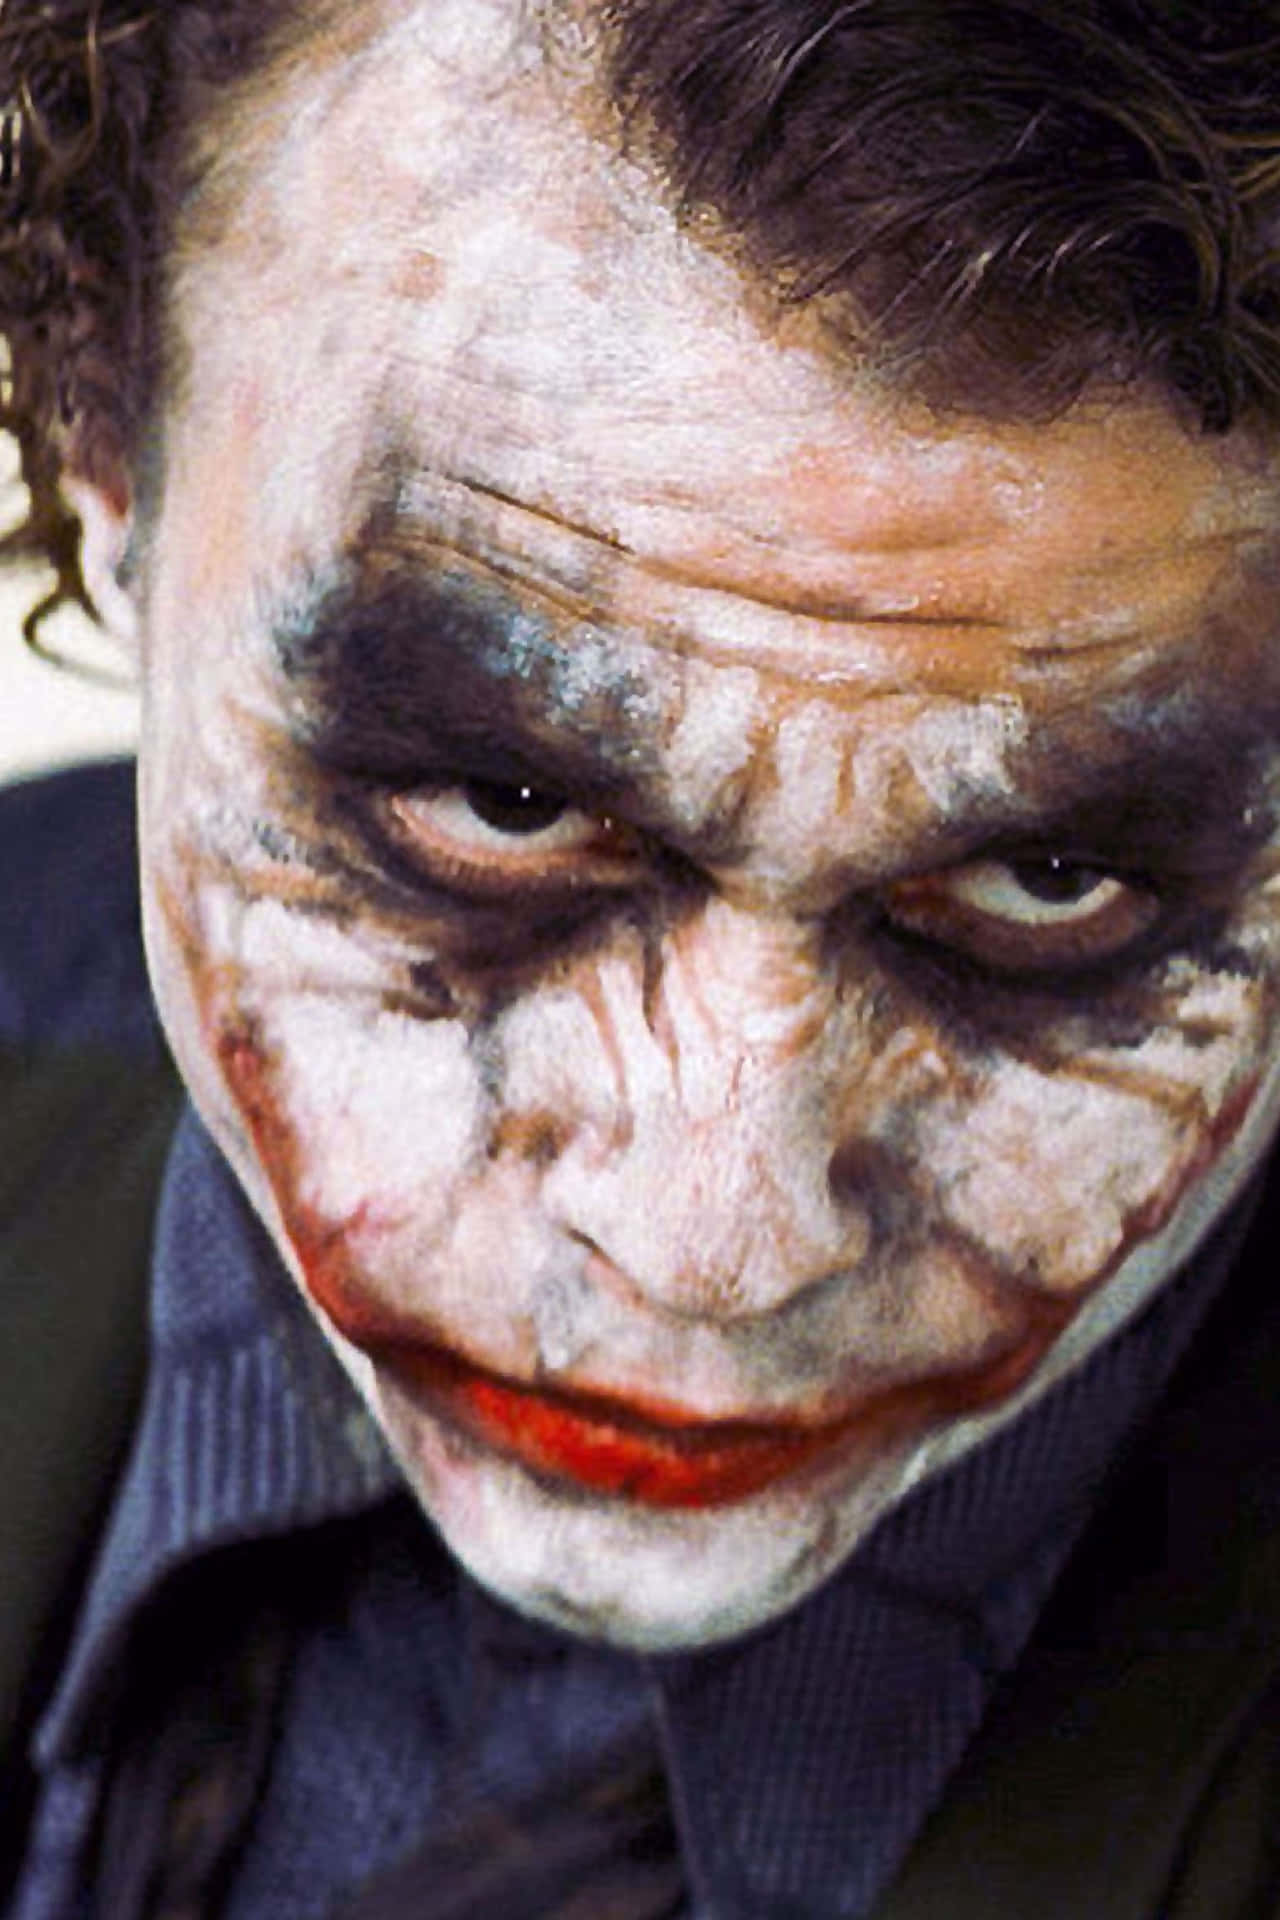 An insight into the mind of the infamous Joker